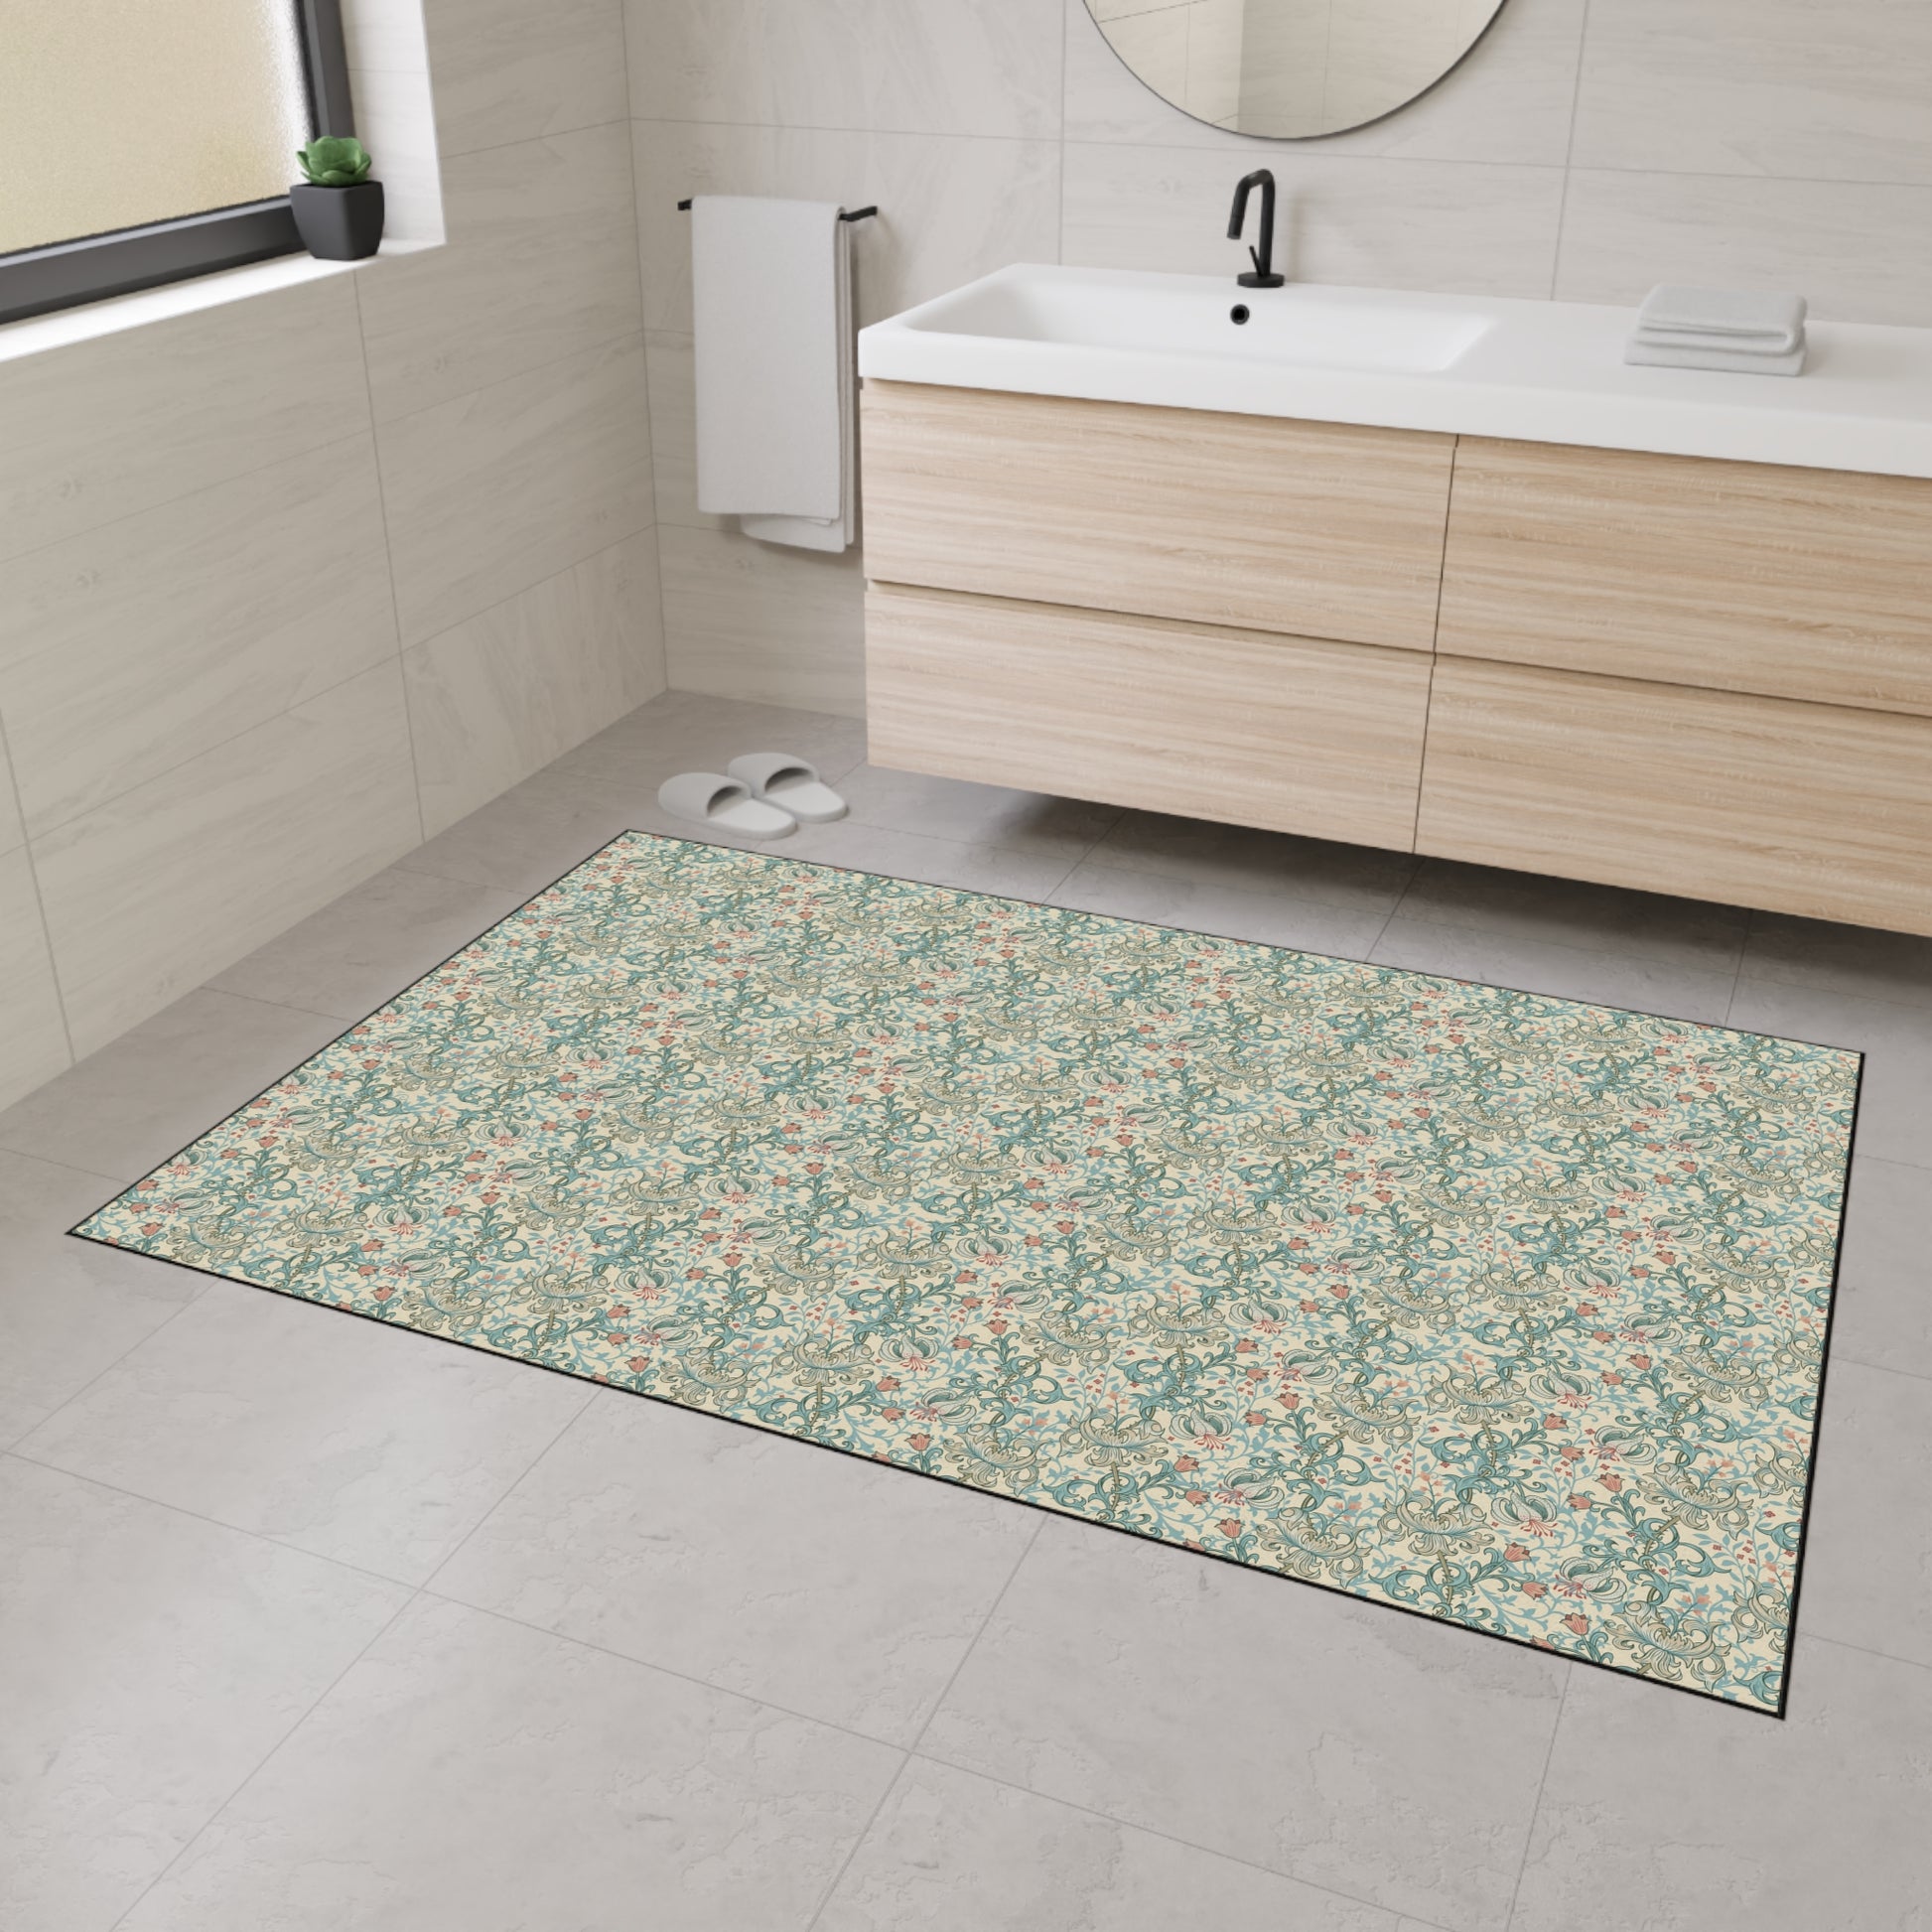 william-morris-co-heavy-duty-floor-mat-golden-lily-collection-mineral-8